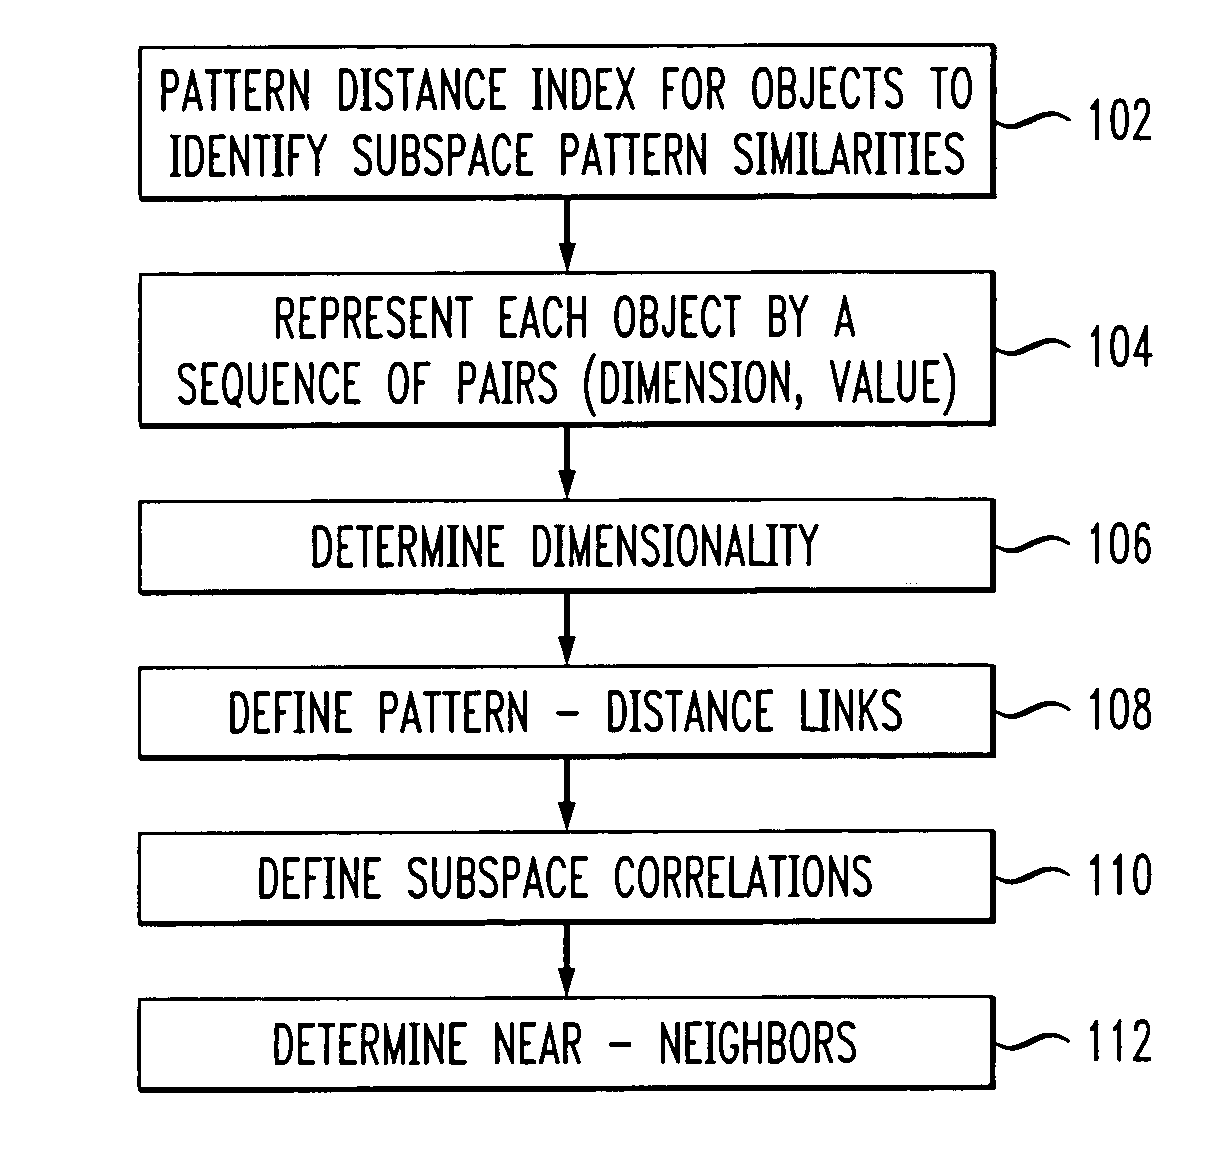 Near-neighbor search in pattern distance spaces